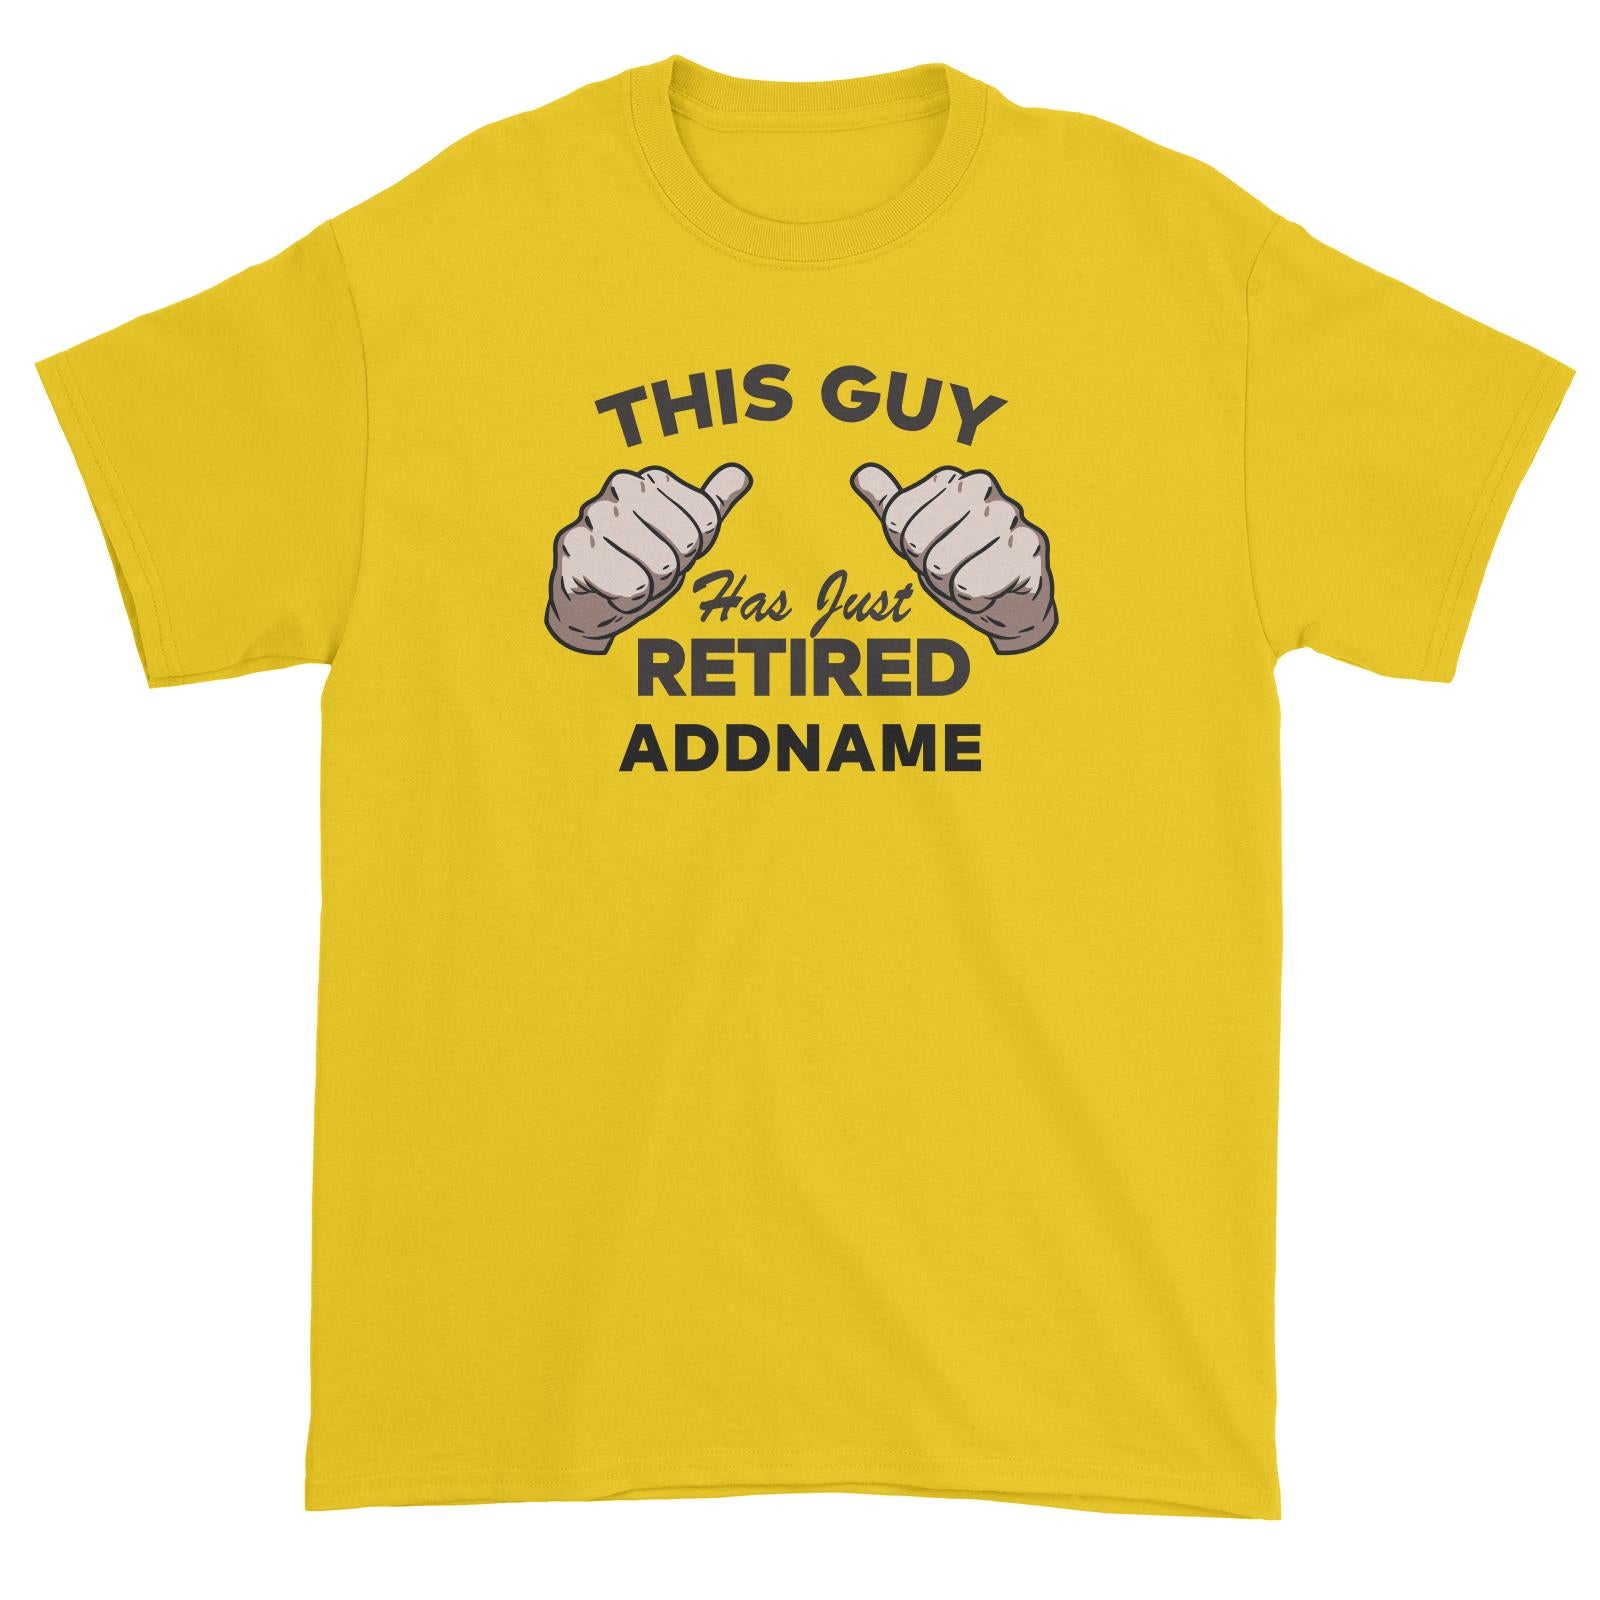 This Guy Has Just Retired Addname Unisex T-Shirt